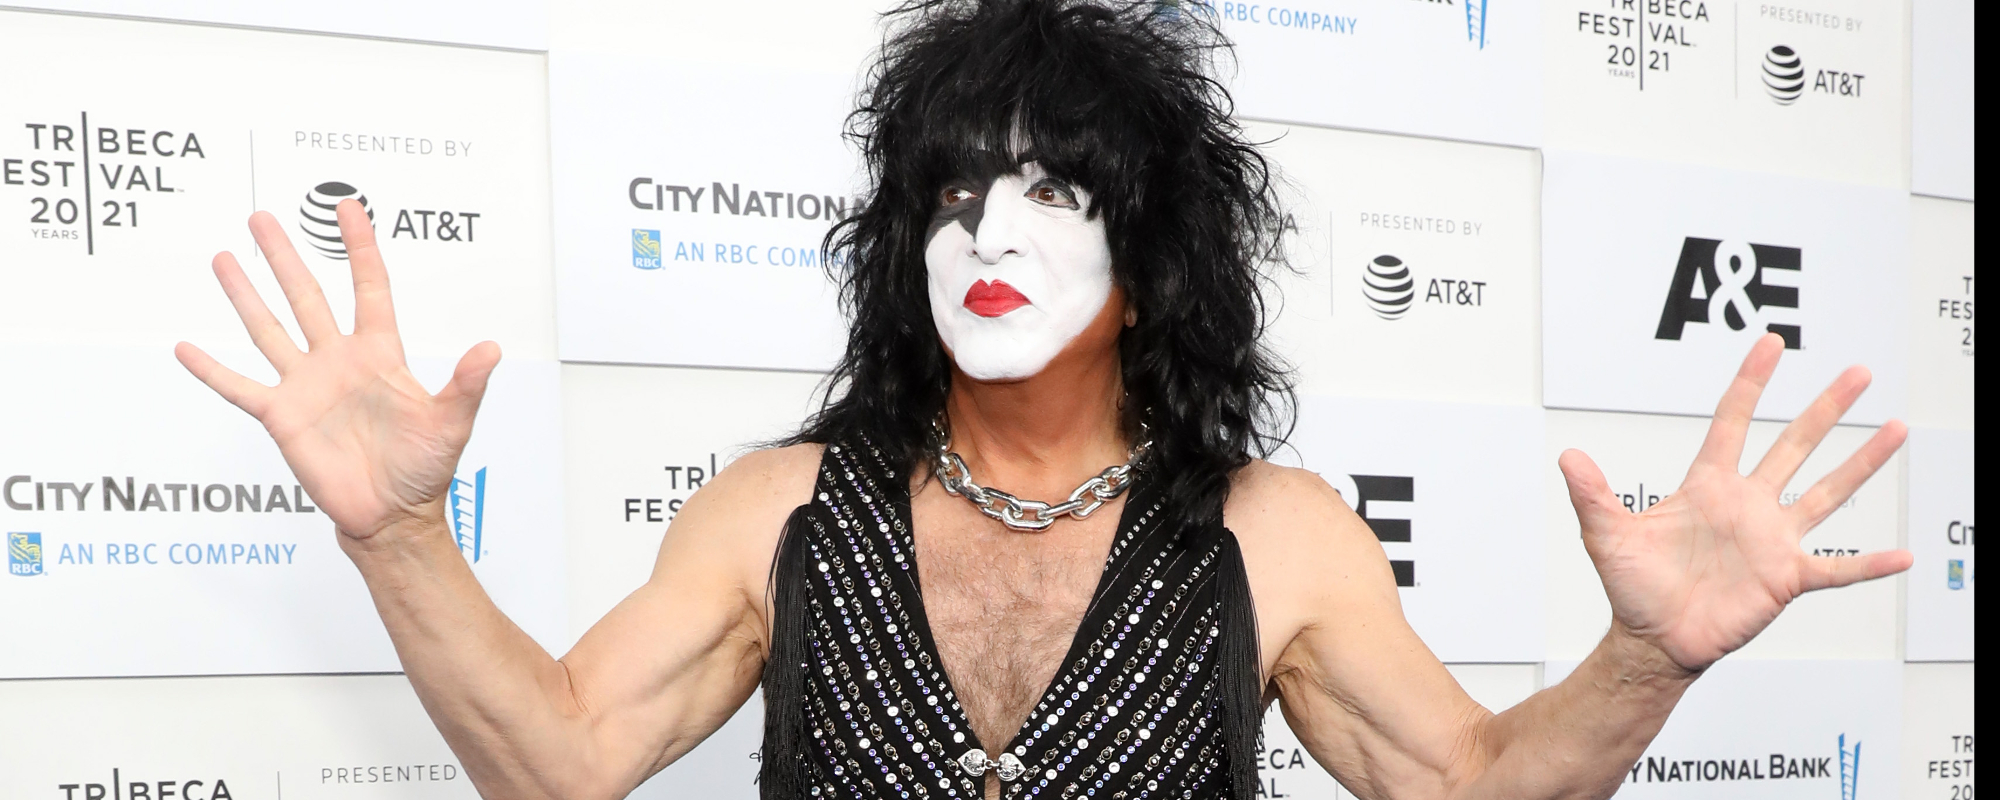 Paul Stanley Brushes off KISS Avatar Backlash, Says Fans “Got Wrong Impression Initially”